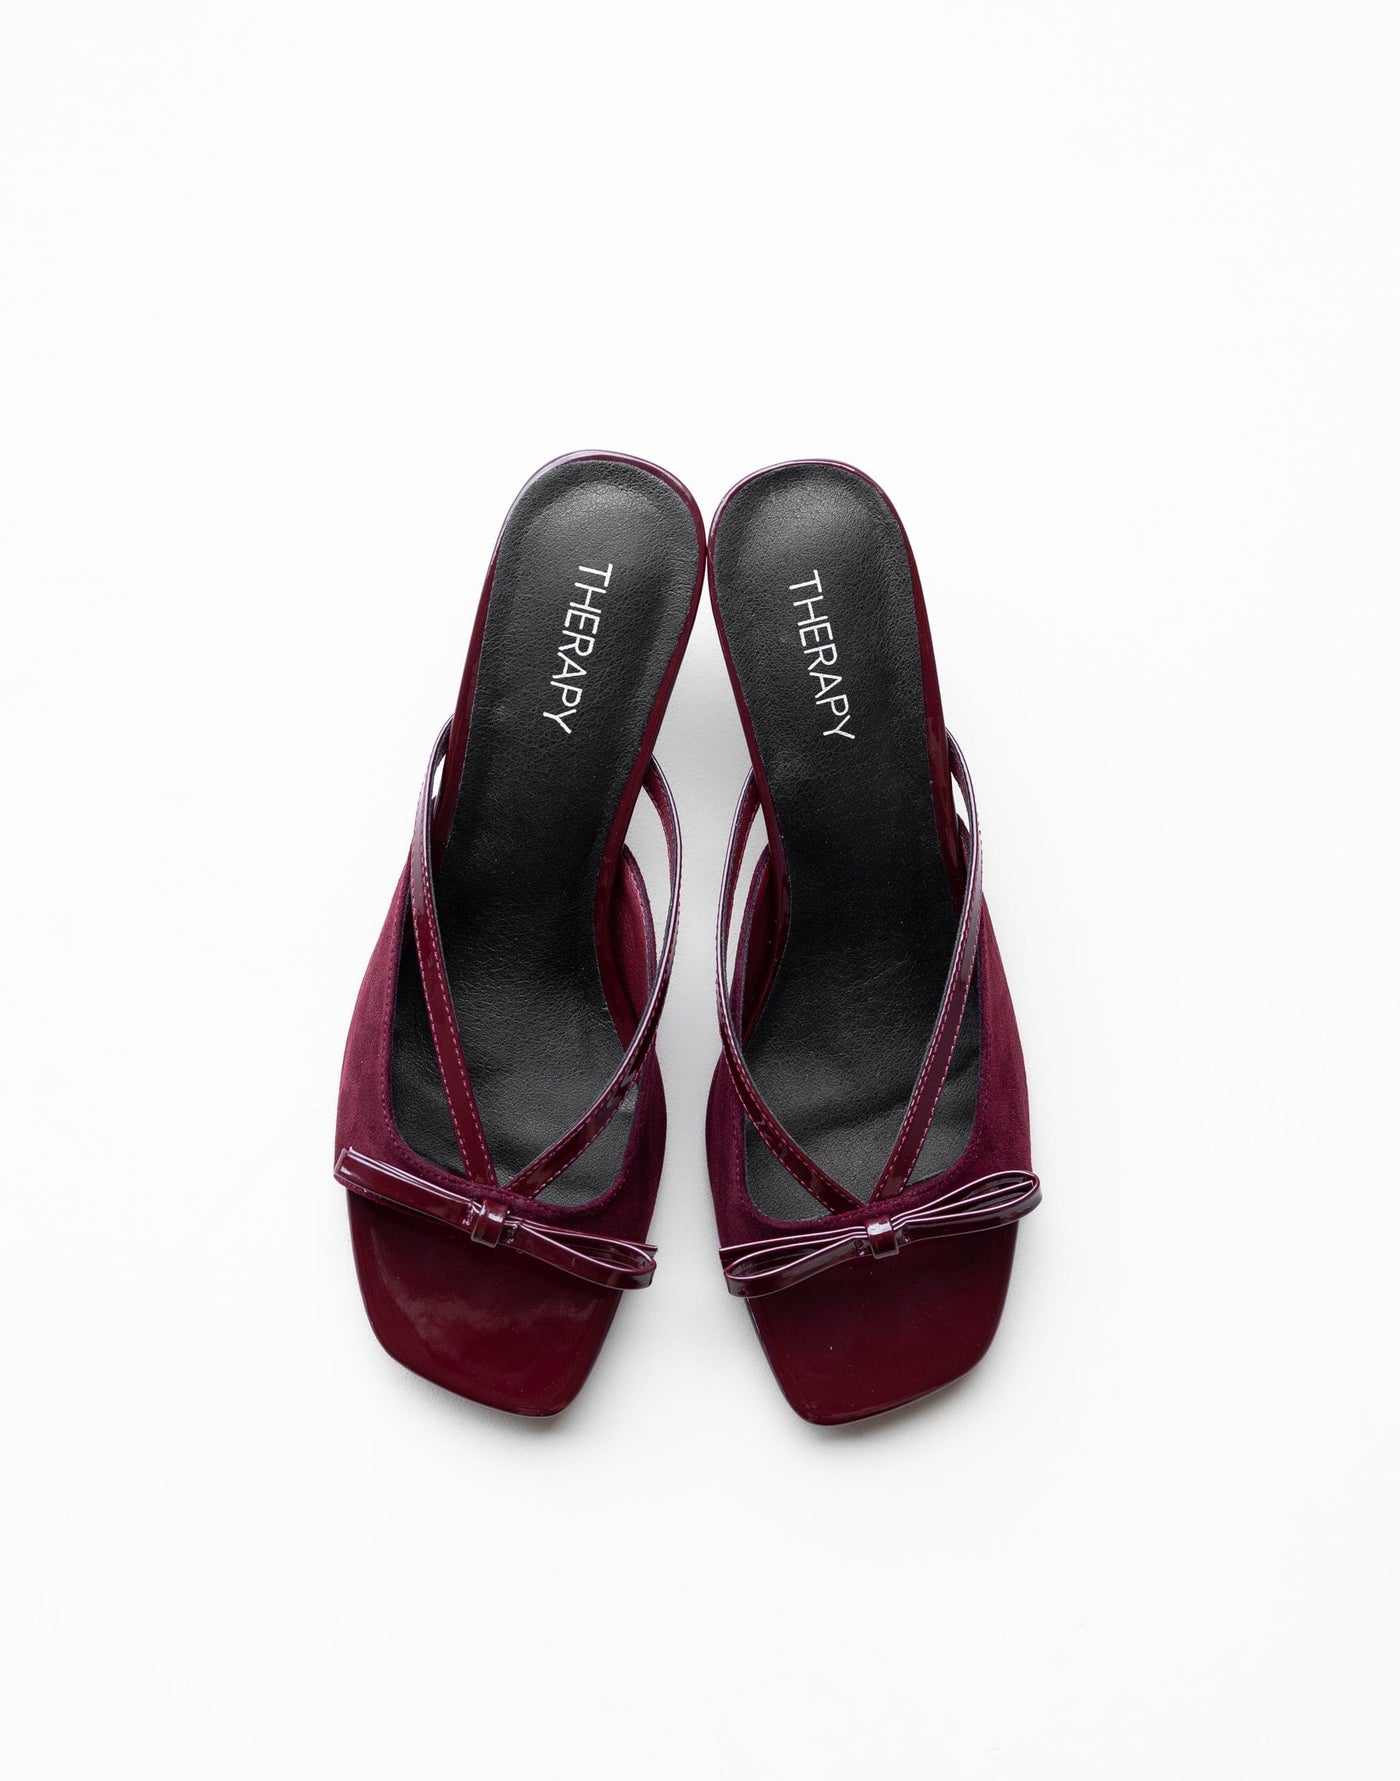 Lulu Heel (Cherry Microsuede) - By Therapy - Kitten Open Toe Bow Detail Heel - Women's Shoes - Charcoal Clothing